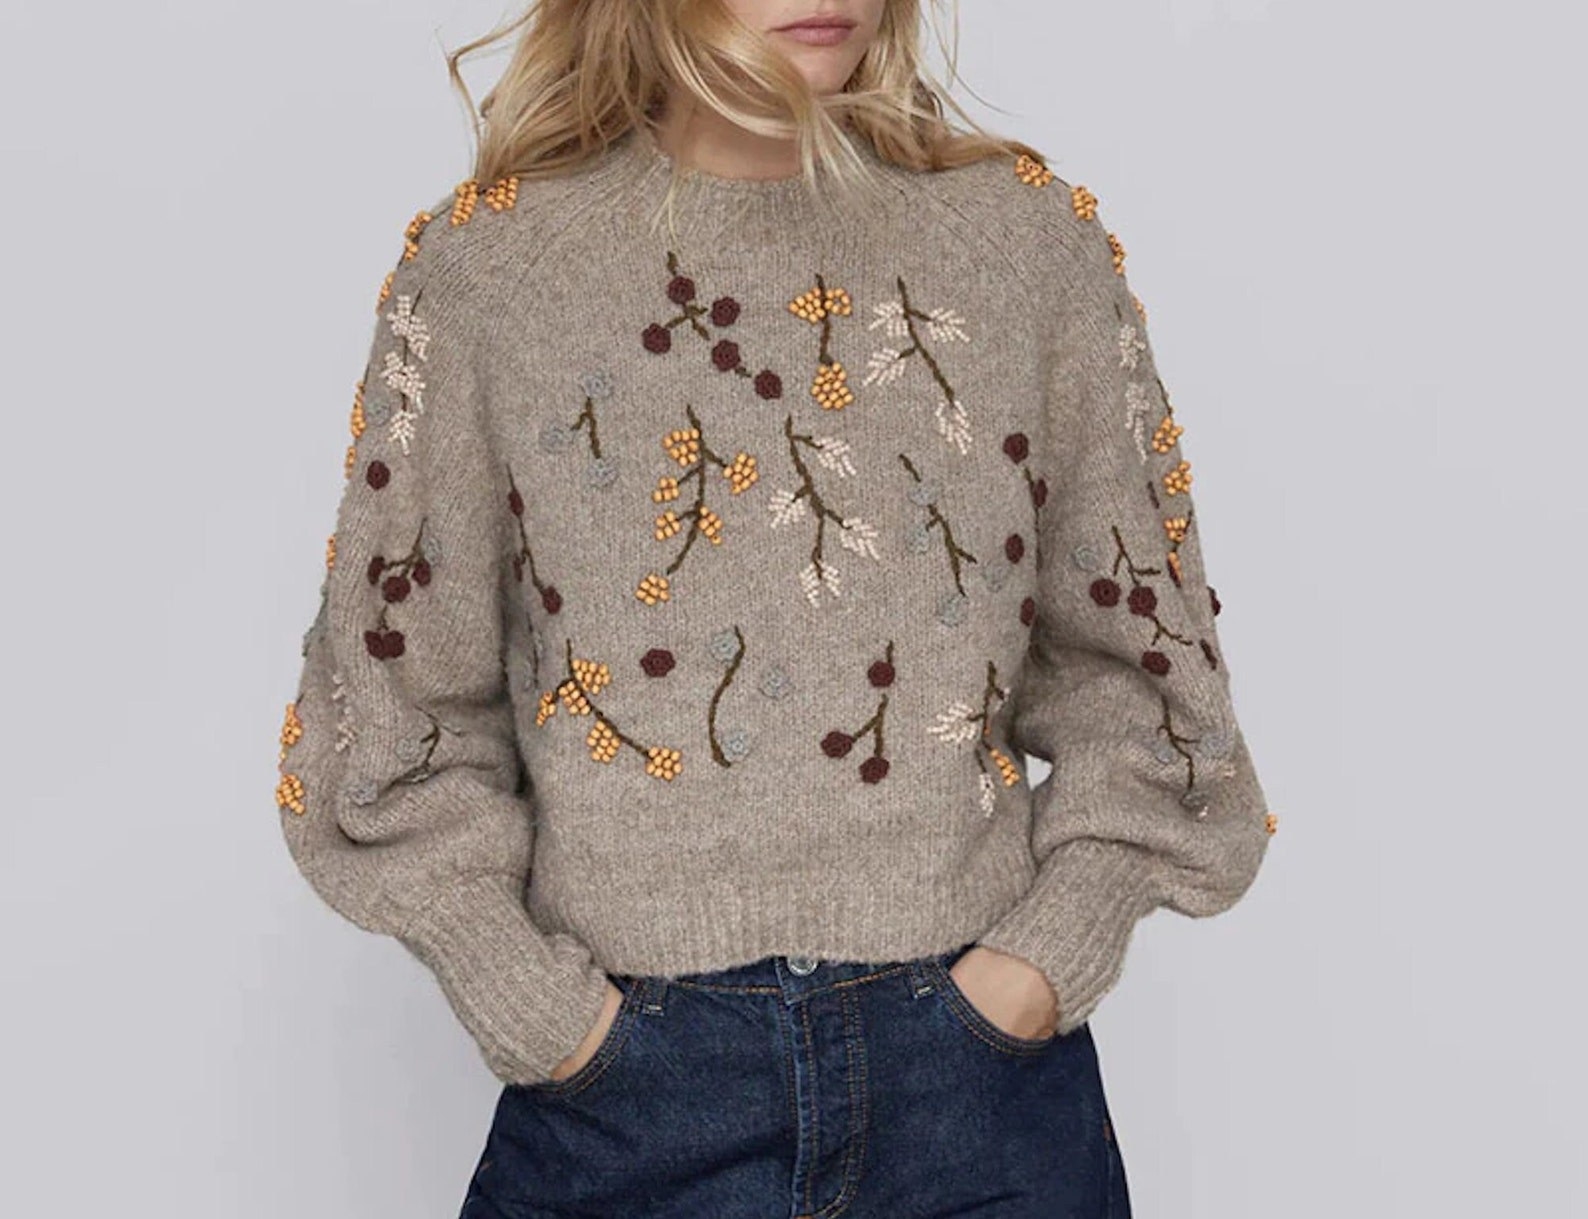 A model wearing the embroidered sweater